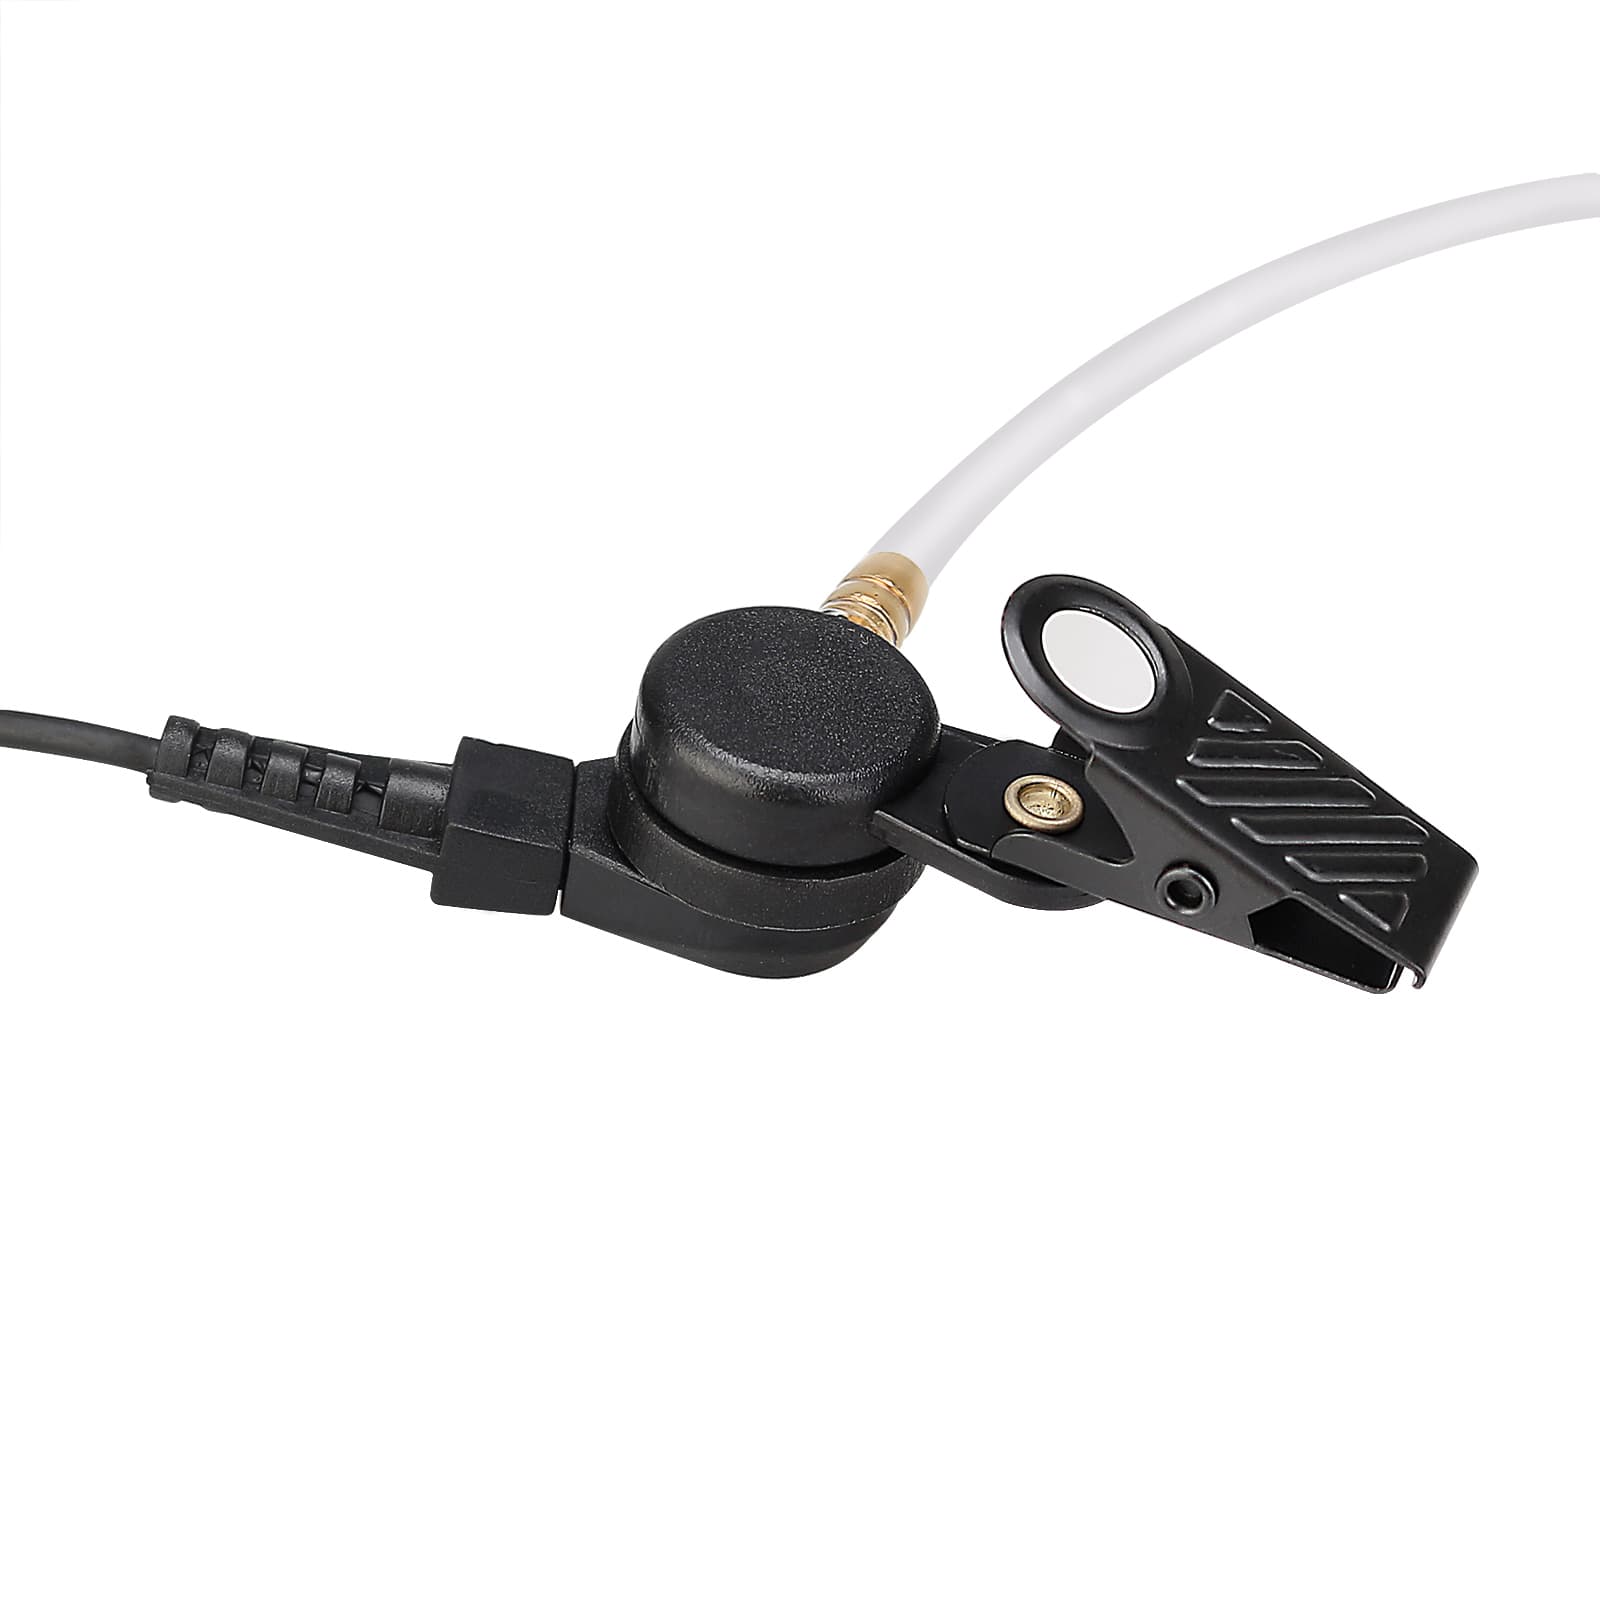 2Pin Covert Acoustic Tube Earpiece for ICOM 2-Way Radio